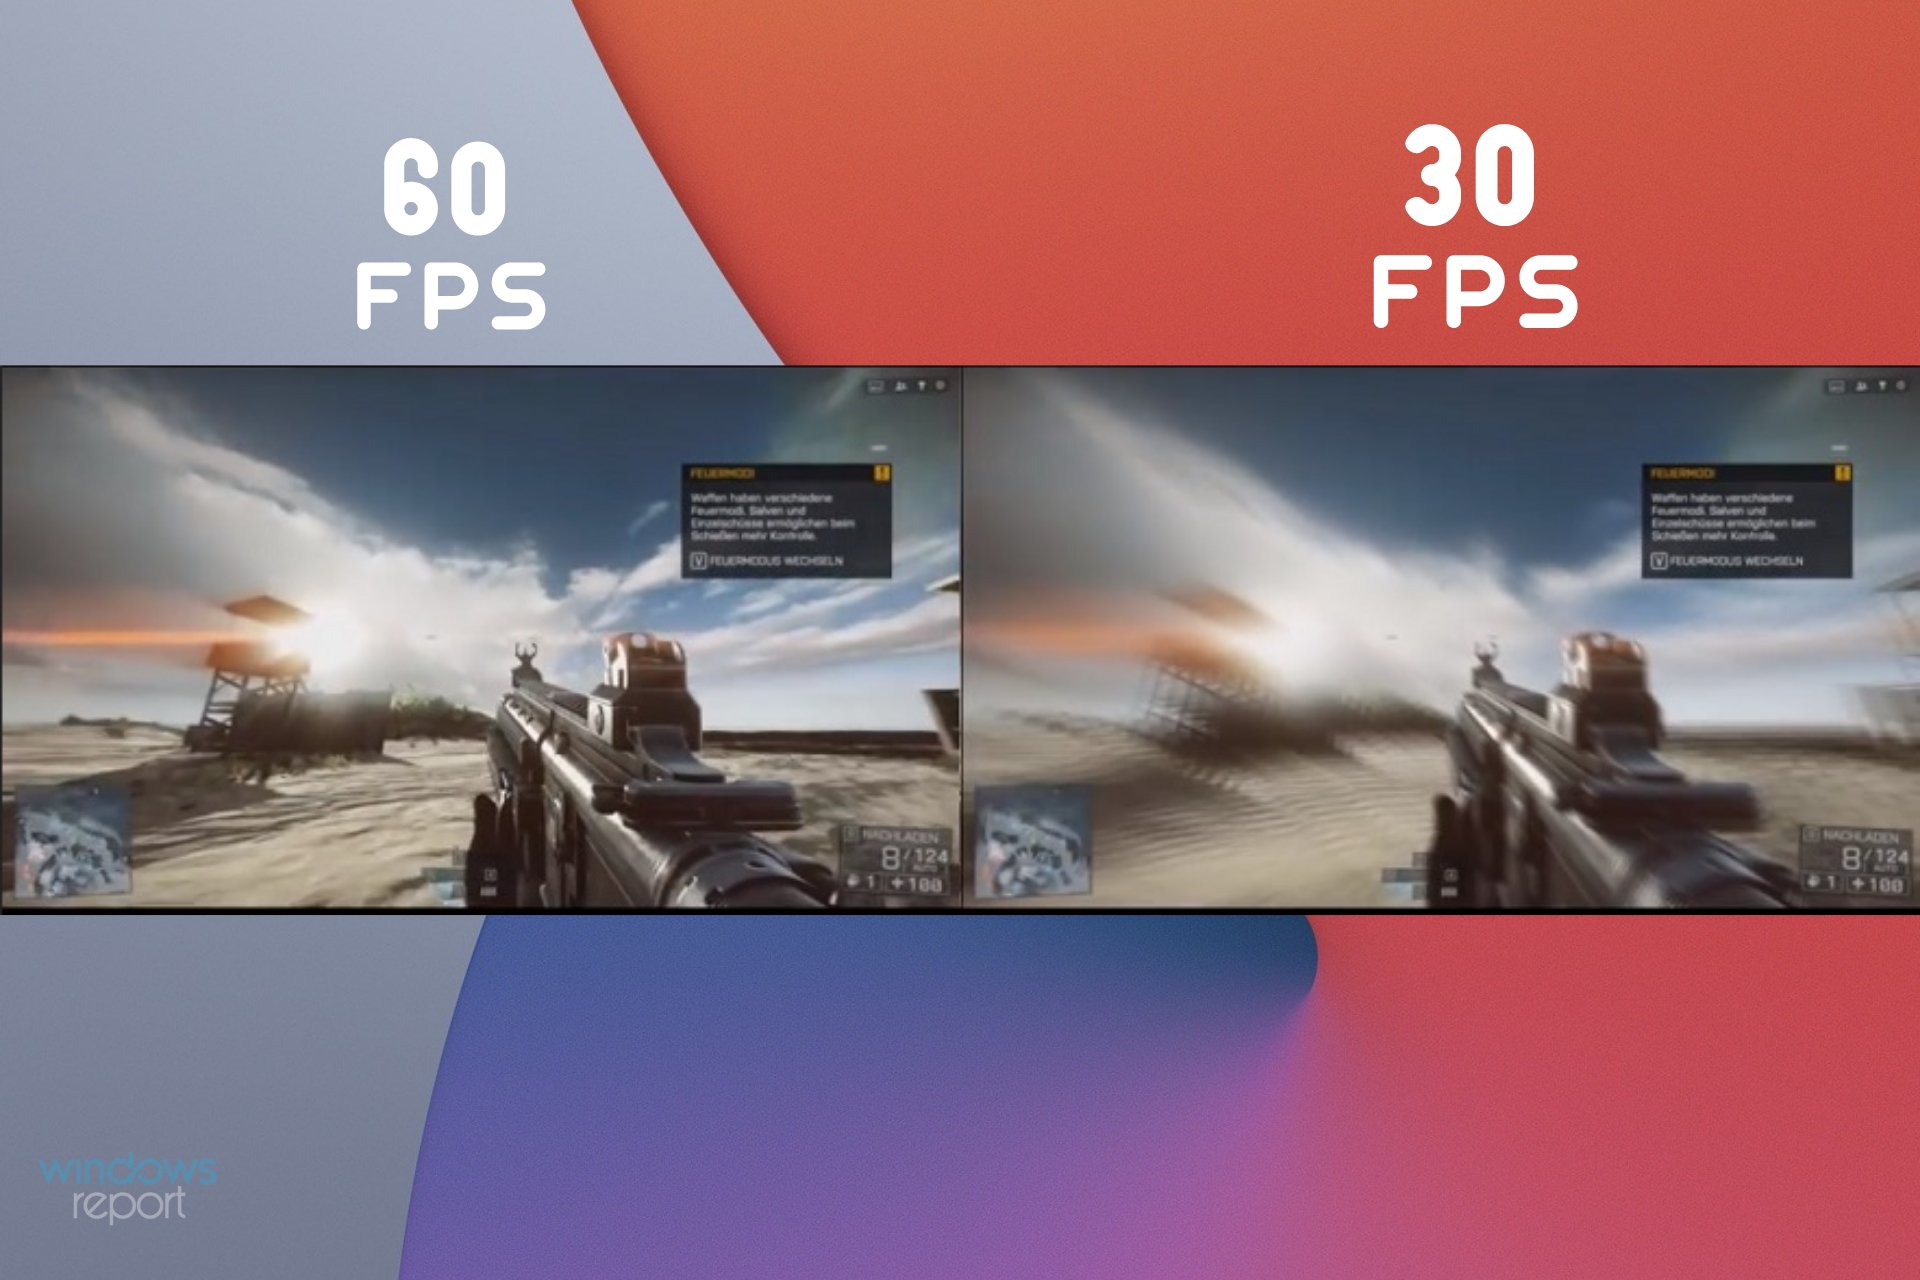 Why does 30 FPS look laggy?